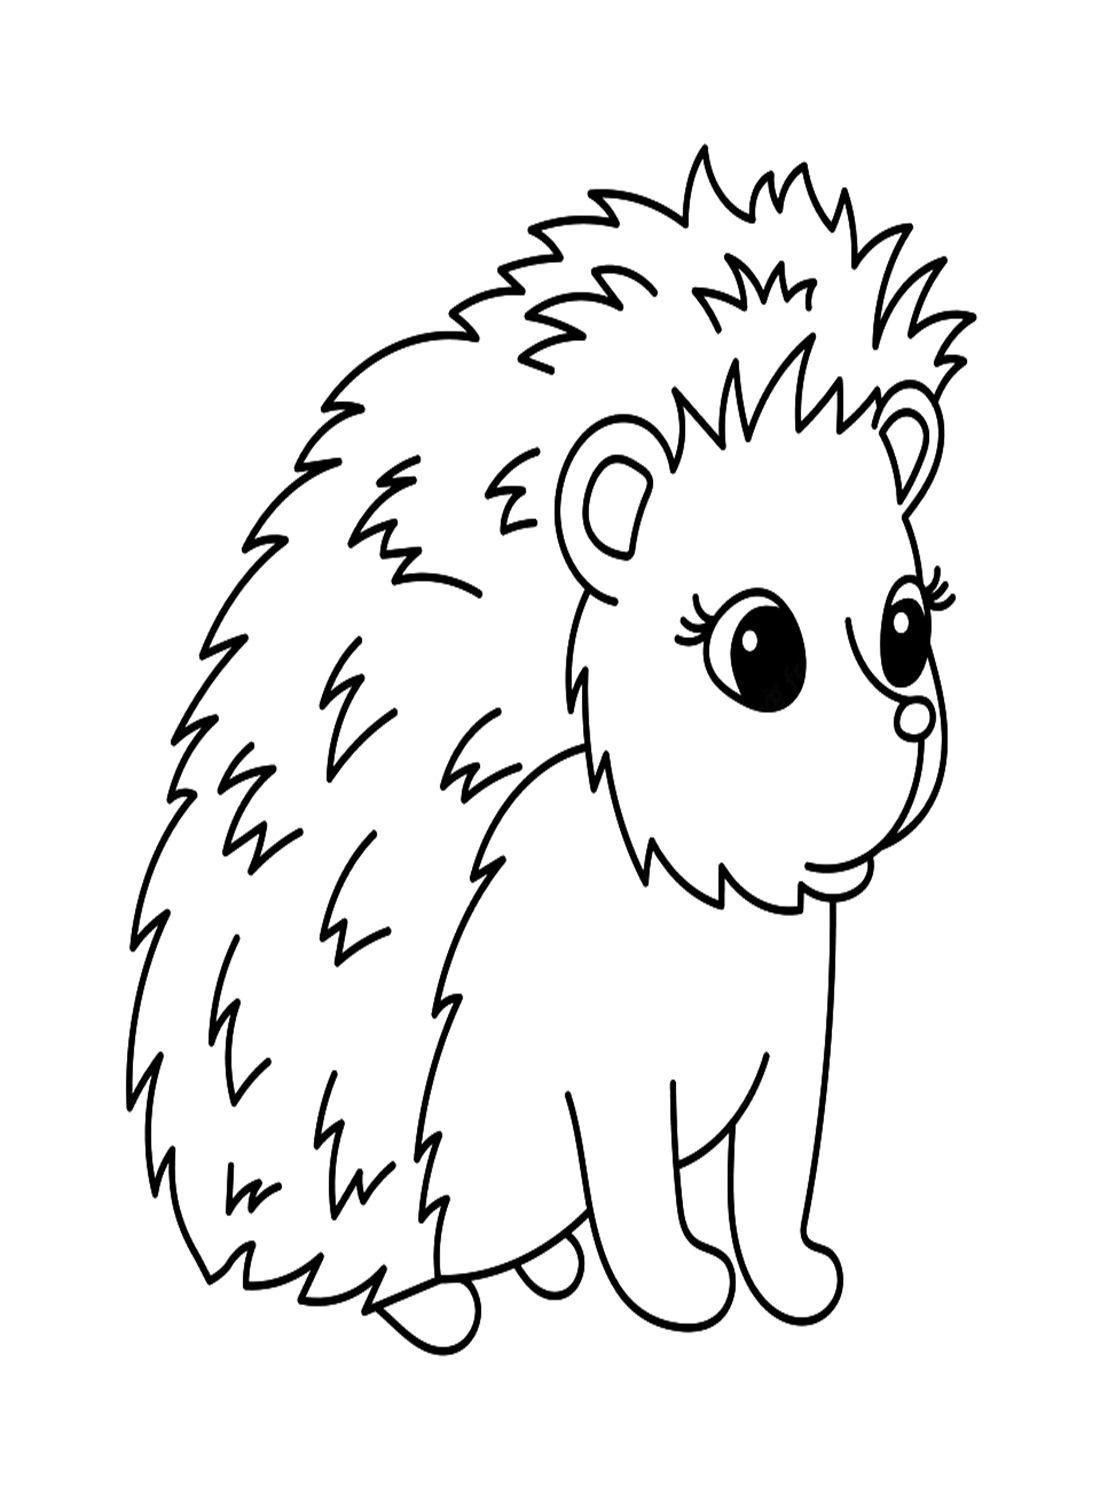 Sad Hedgehog Coloring Page - Free Printable Coloring Pages